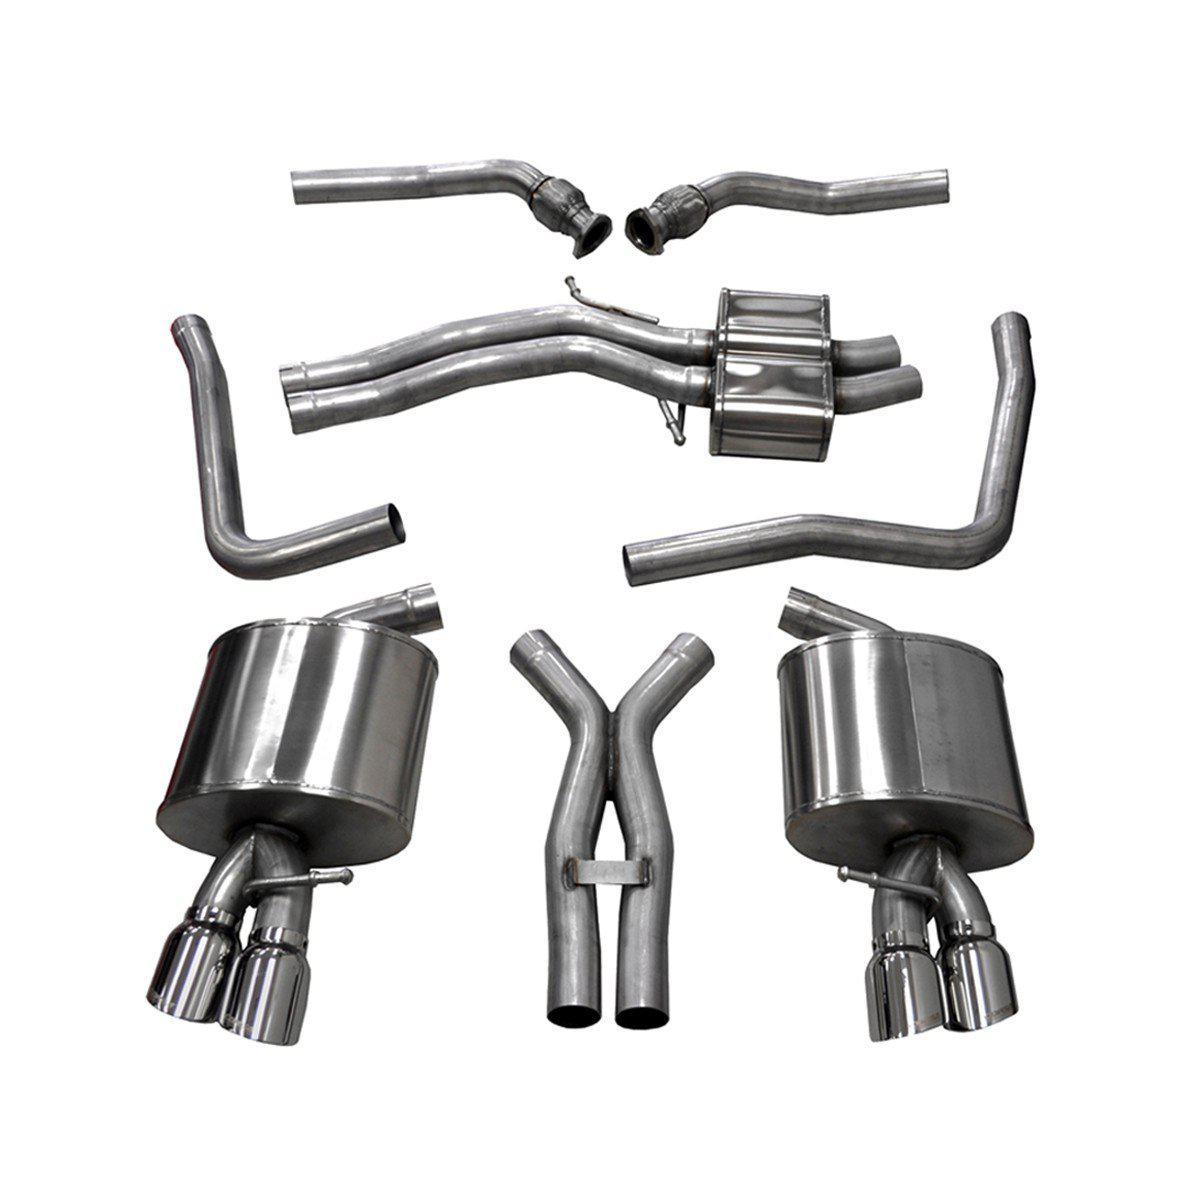 Corsa Performance B8 Audi S5 4.2l Cat-Back Exhaust System-A Little Tuning Co